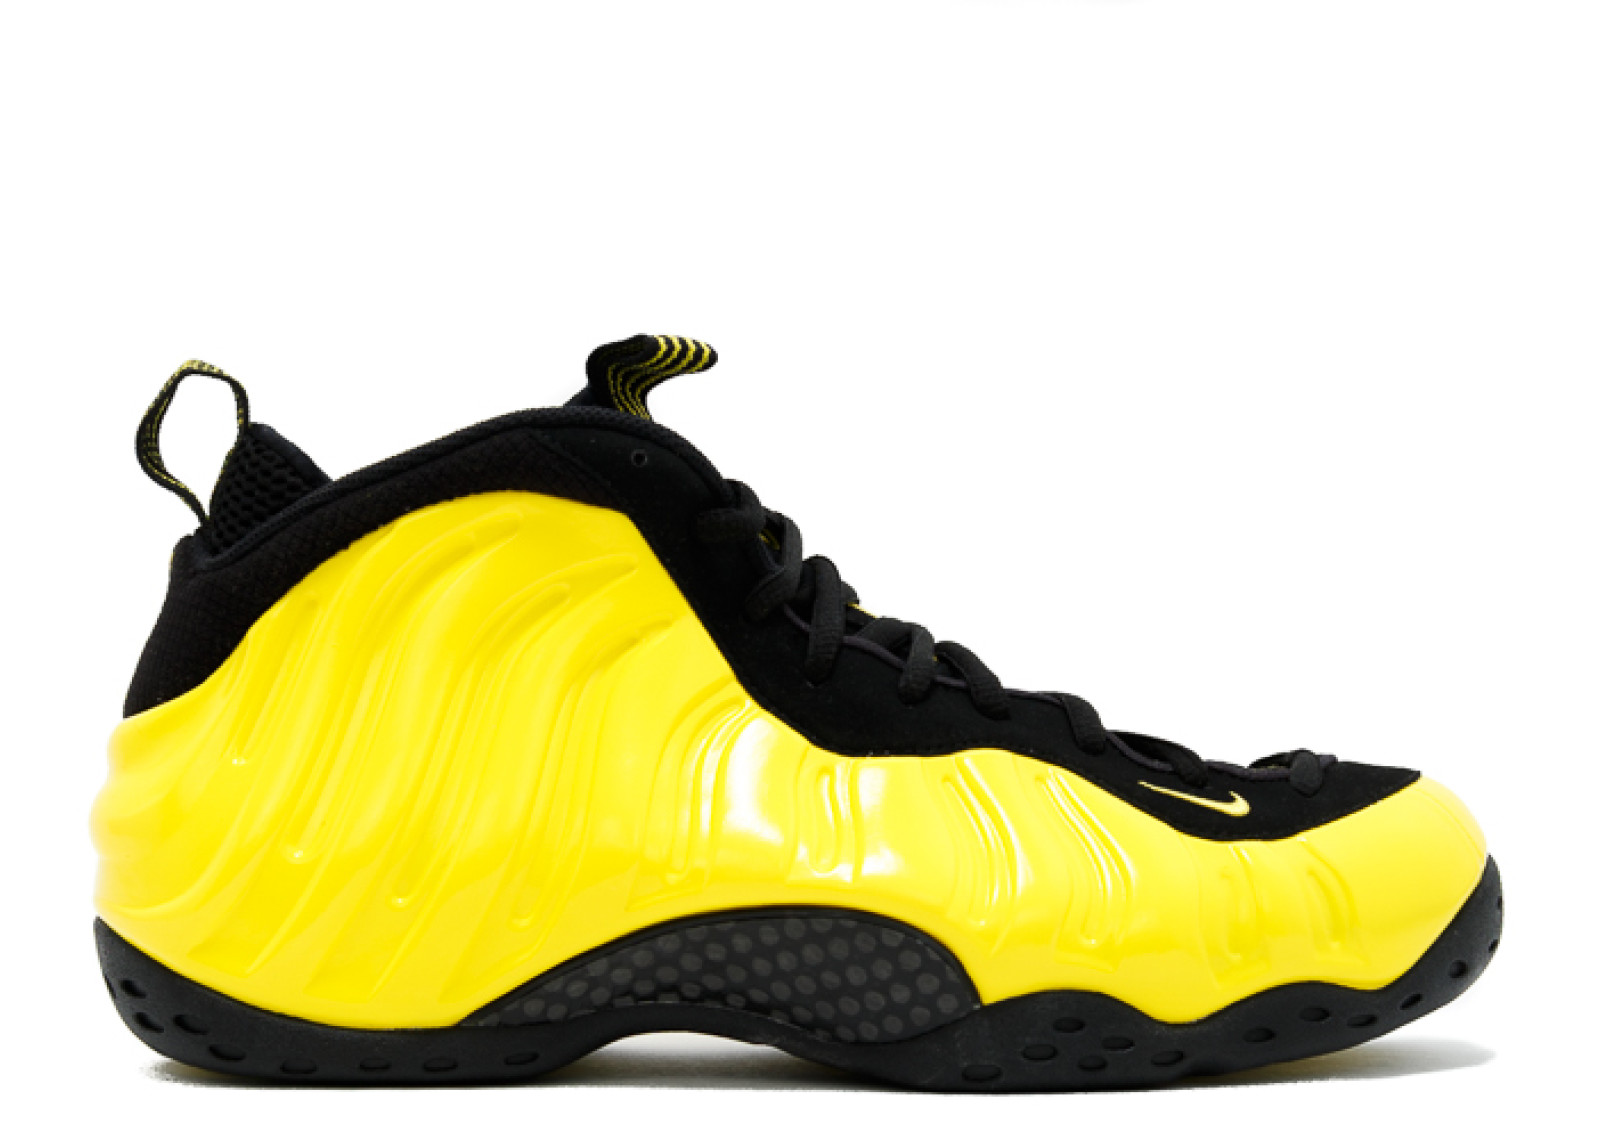 Gold Foamposite Kijiji in Ontario. Buy, Sell & Save with